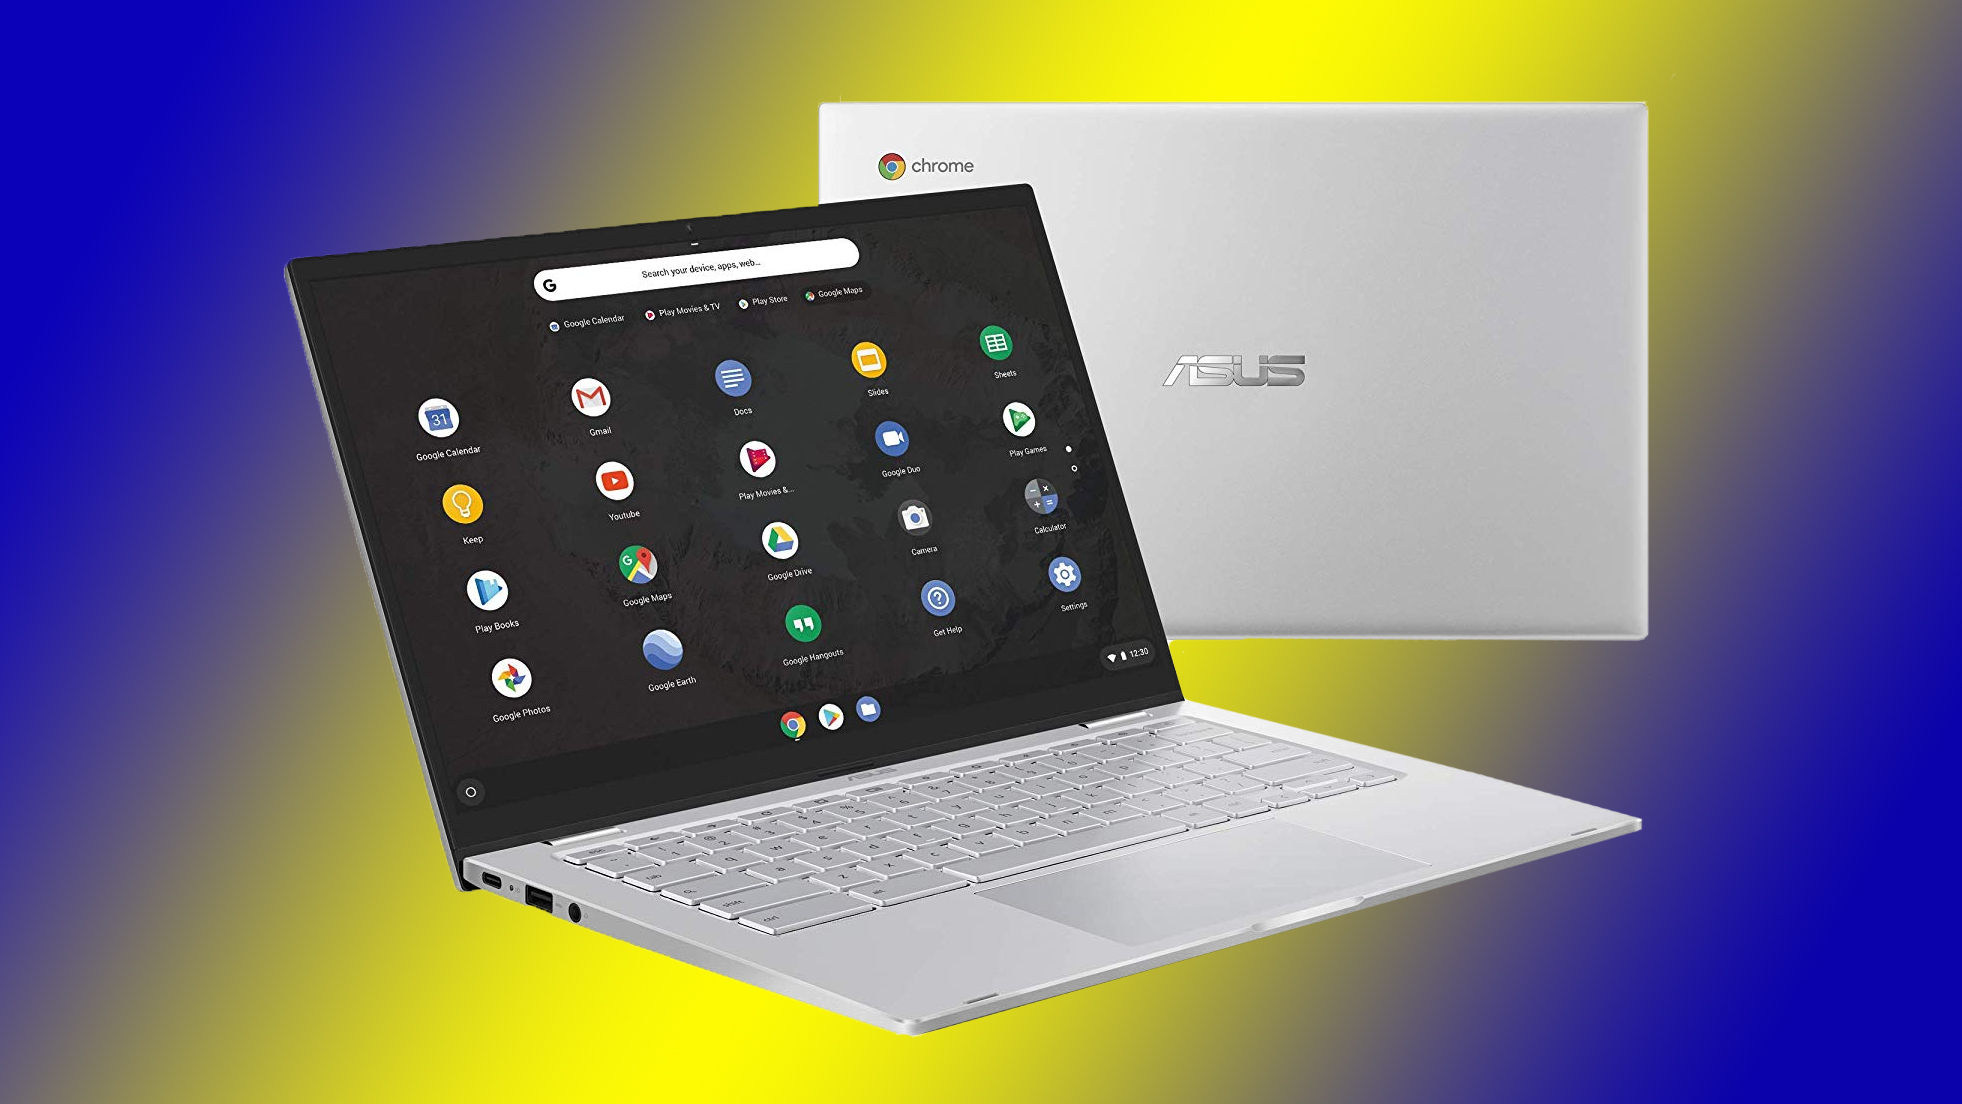 Google offers older PCs to switch from Windows 10 to ChromeOS Flex and has certified 600 devices